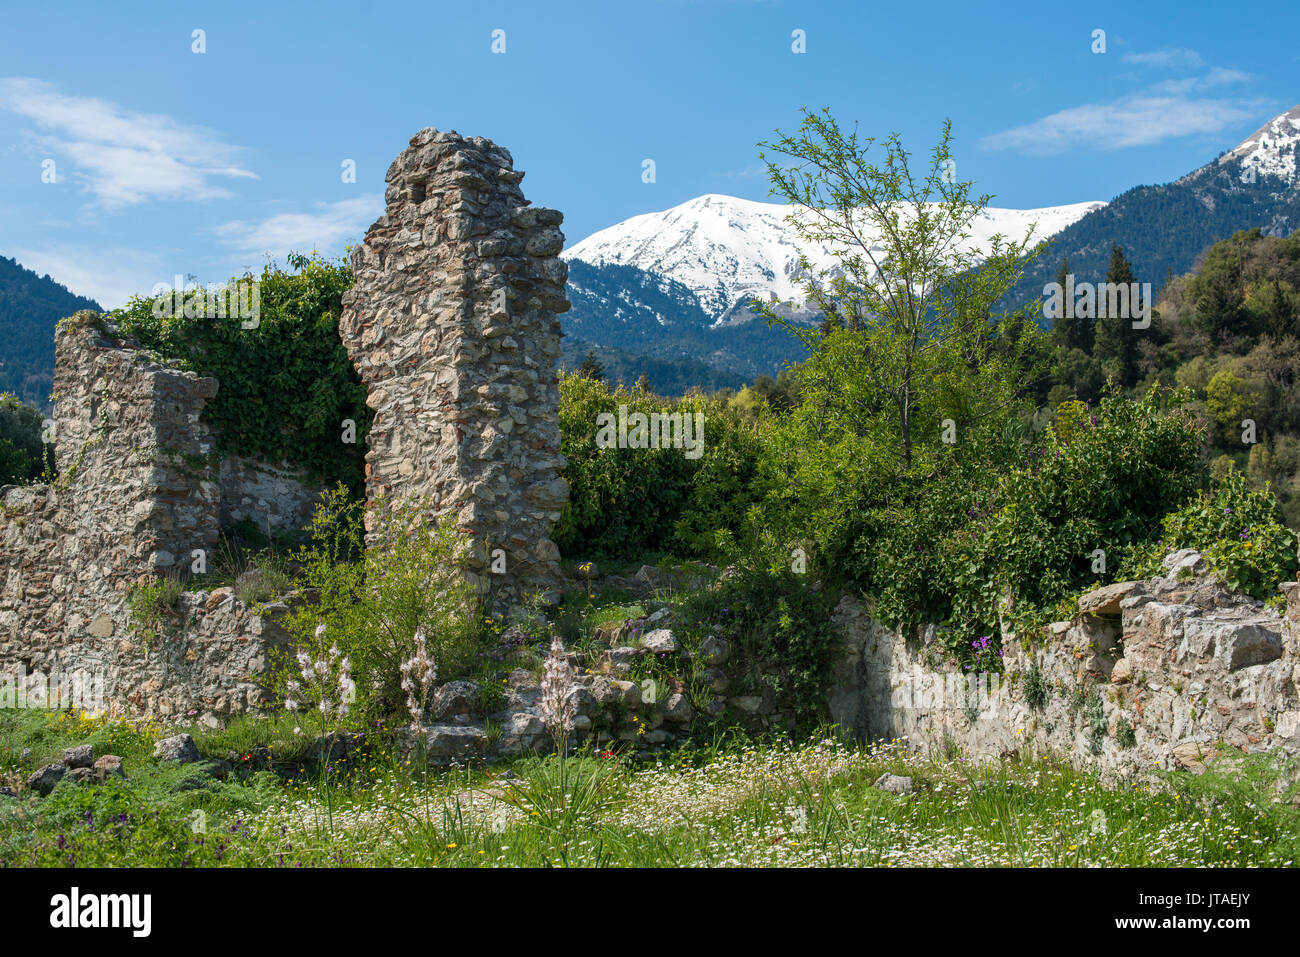 The ancient ruins of Mystras, UNESCO, and the snow covered Taygetos Mountains in the distance, Peloponnese, Greece, Europe Stock Photo